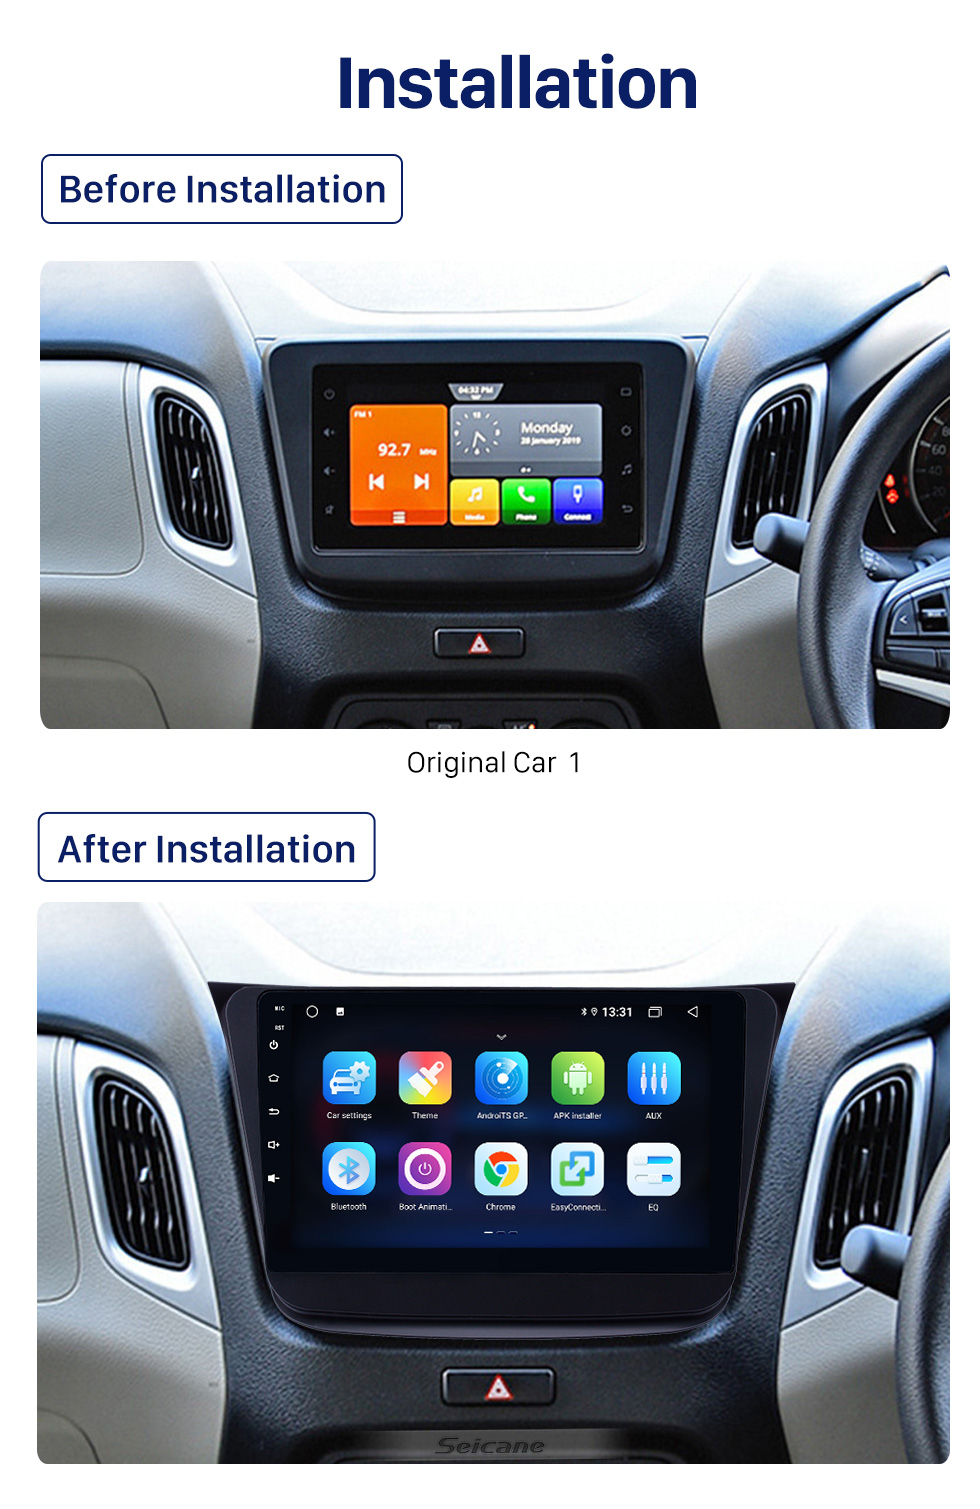 Seicane OEM 9 inch Android 10.0 Radio for 2019 Suzuki WAGON-R Bluetooth HD Touchscreen GPS Navigation AUX USB support Carplay DVR OBD Rearview camera